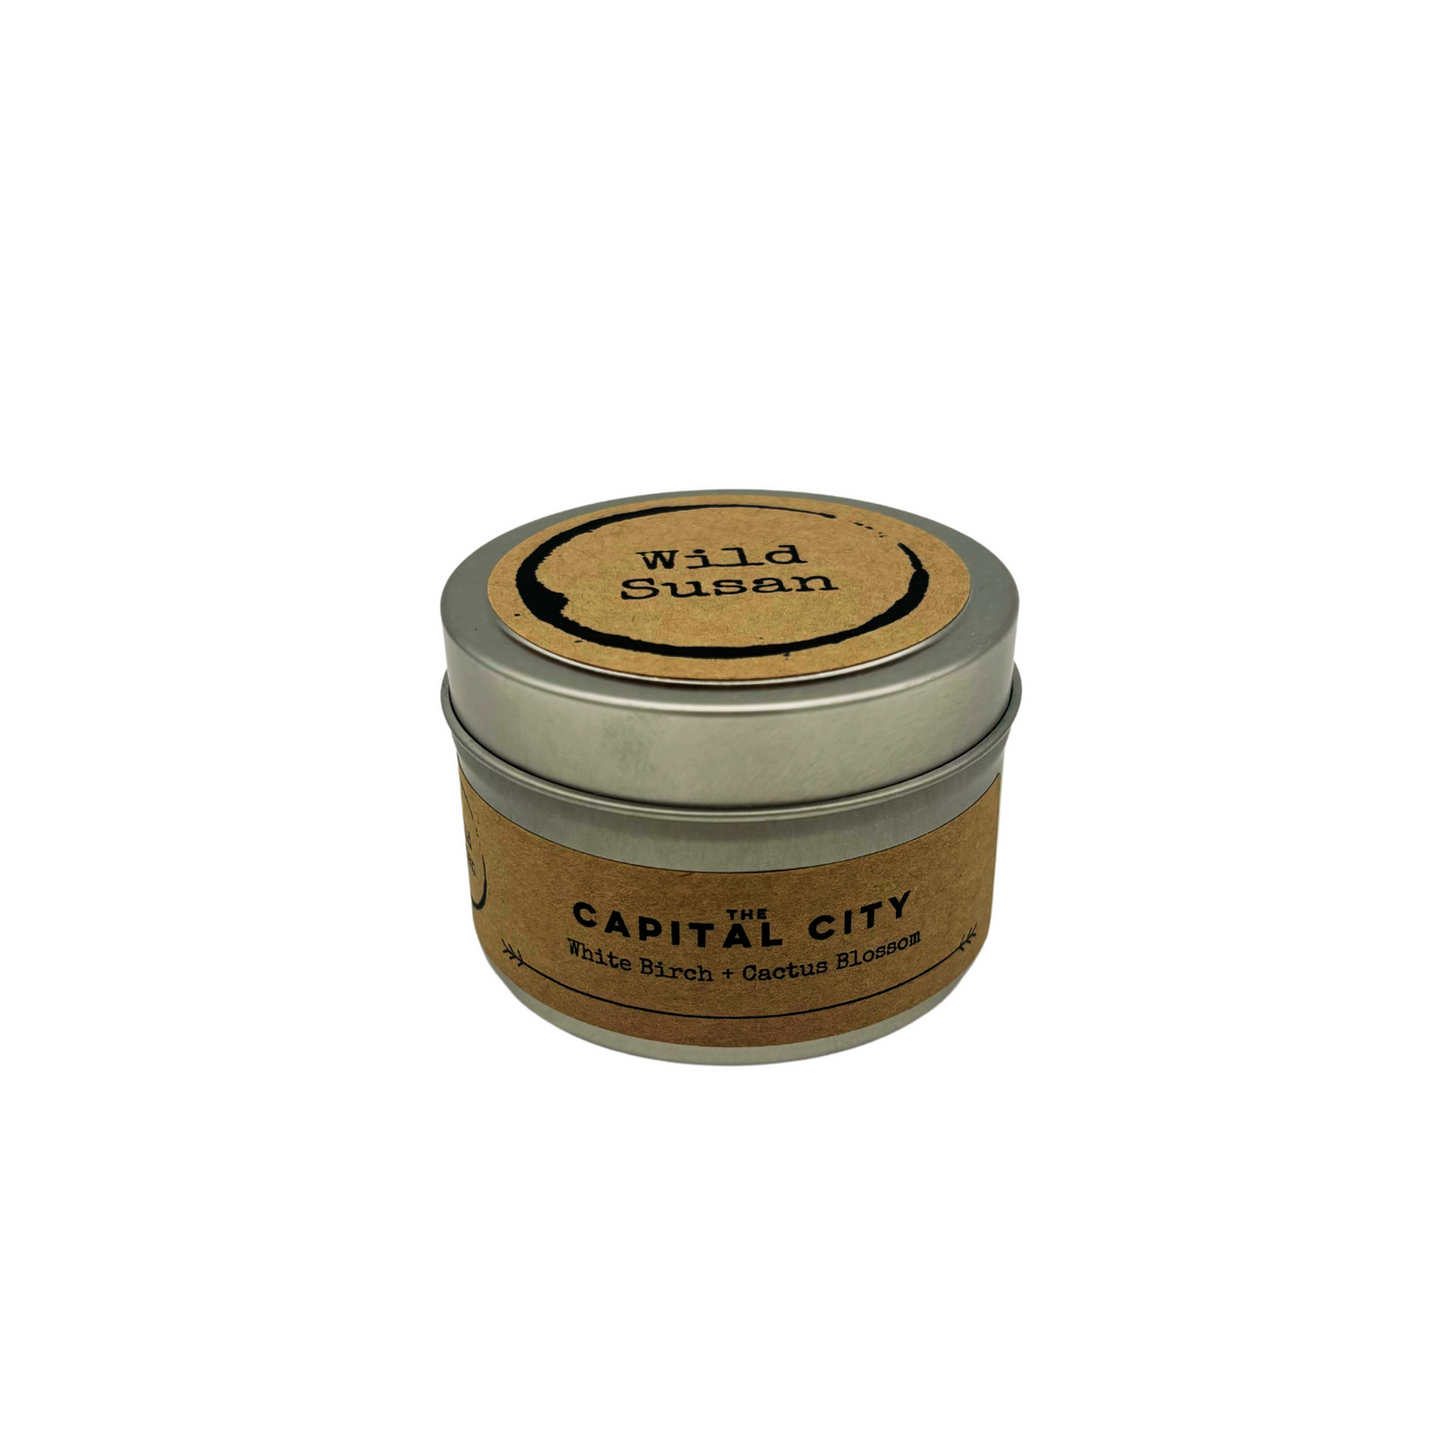 Capital City [White Birch + Cactus Blossom] Soy Candle/Wax Melt